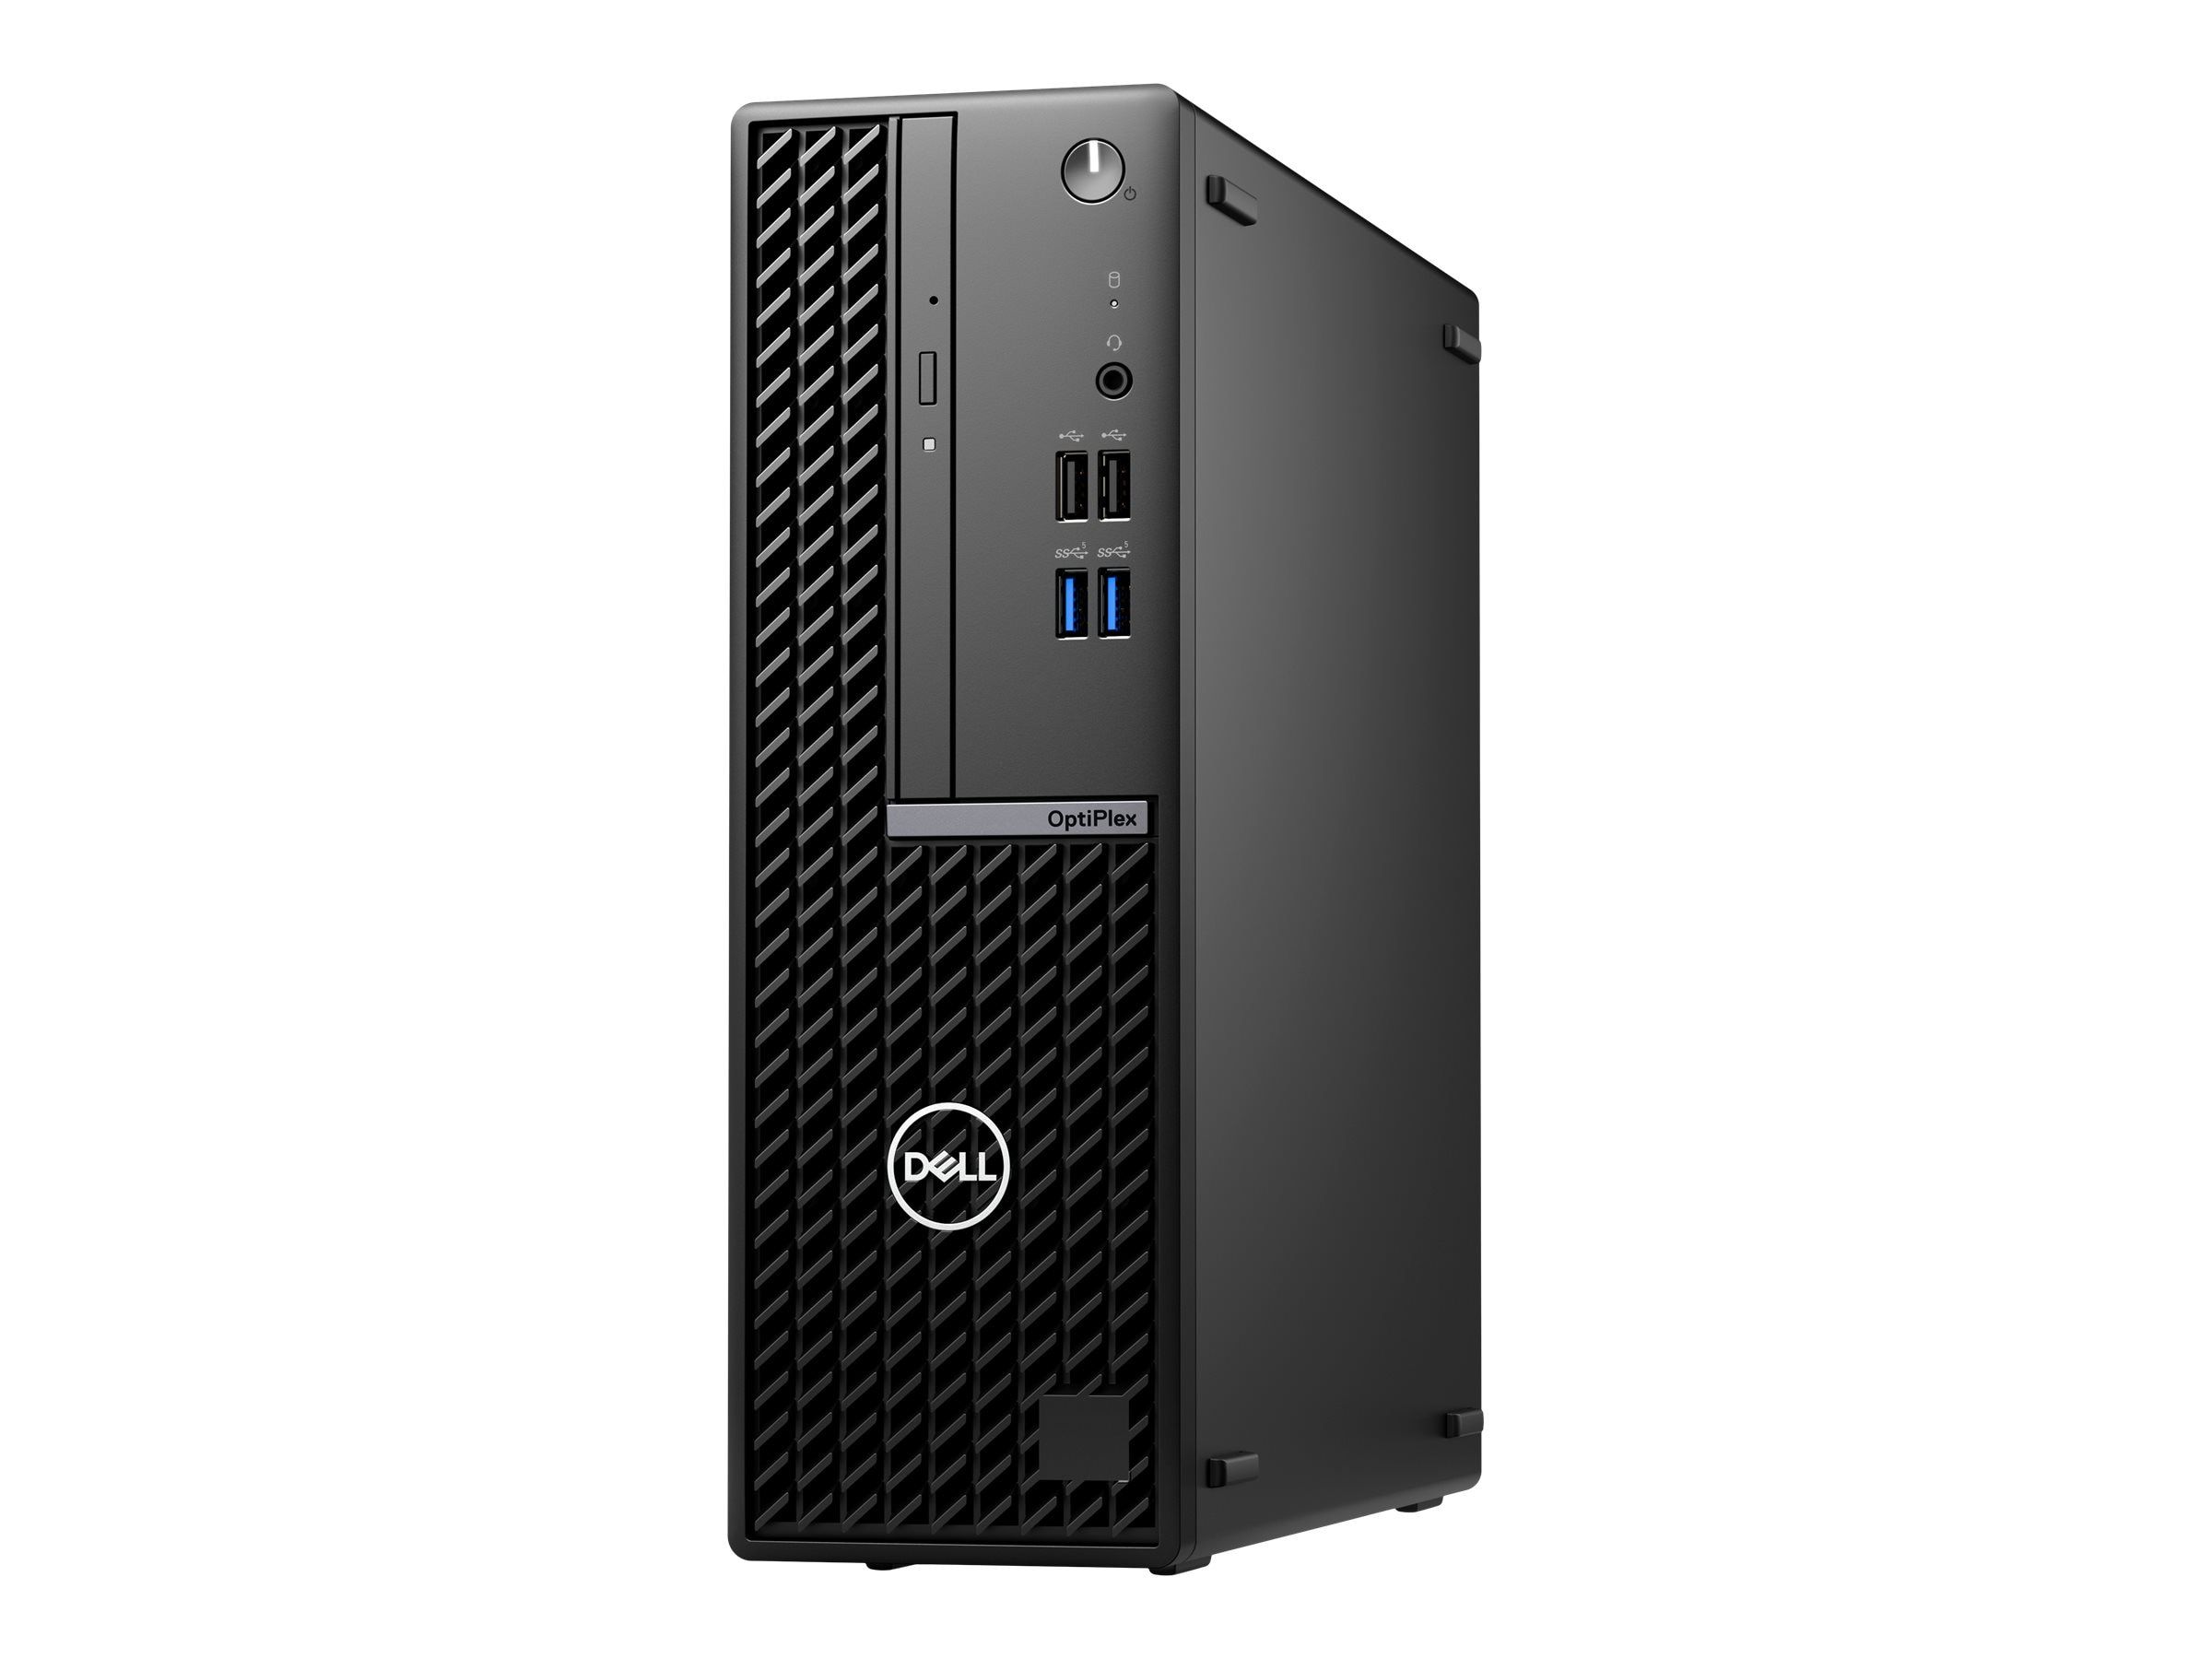 Dell Optiplex 7010 SFF, Intel Core i5-13500(6+8Cores/24MB/20T/2.5GHz to 4.8GHz),8GB(1x8) DDR4,512GB(M.2)NVMe SSD,Intel Integrated Graphics,noWiFi,Dell Optical Mouse - MS116,Dell Wired Keyboard KB216,180W,Win11Pro,3Yr ProSupport_1